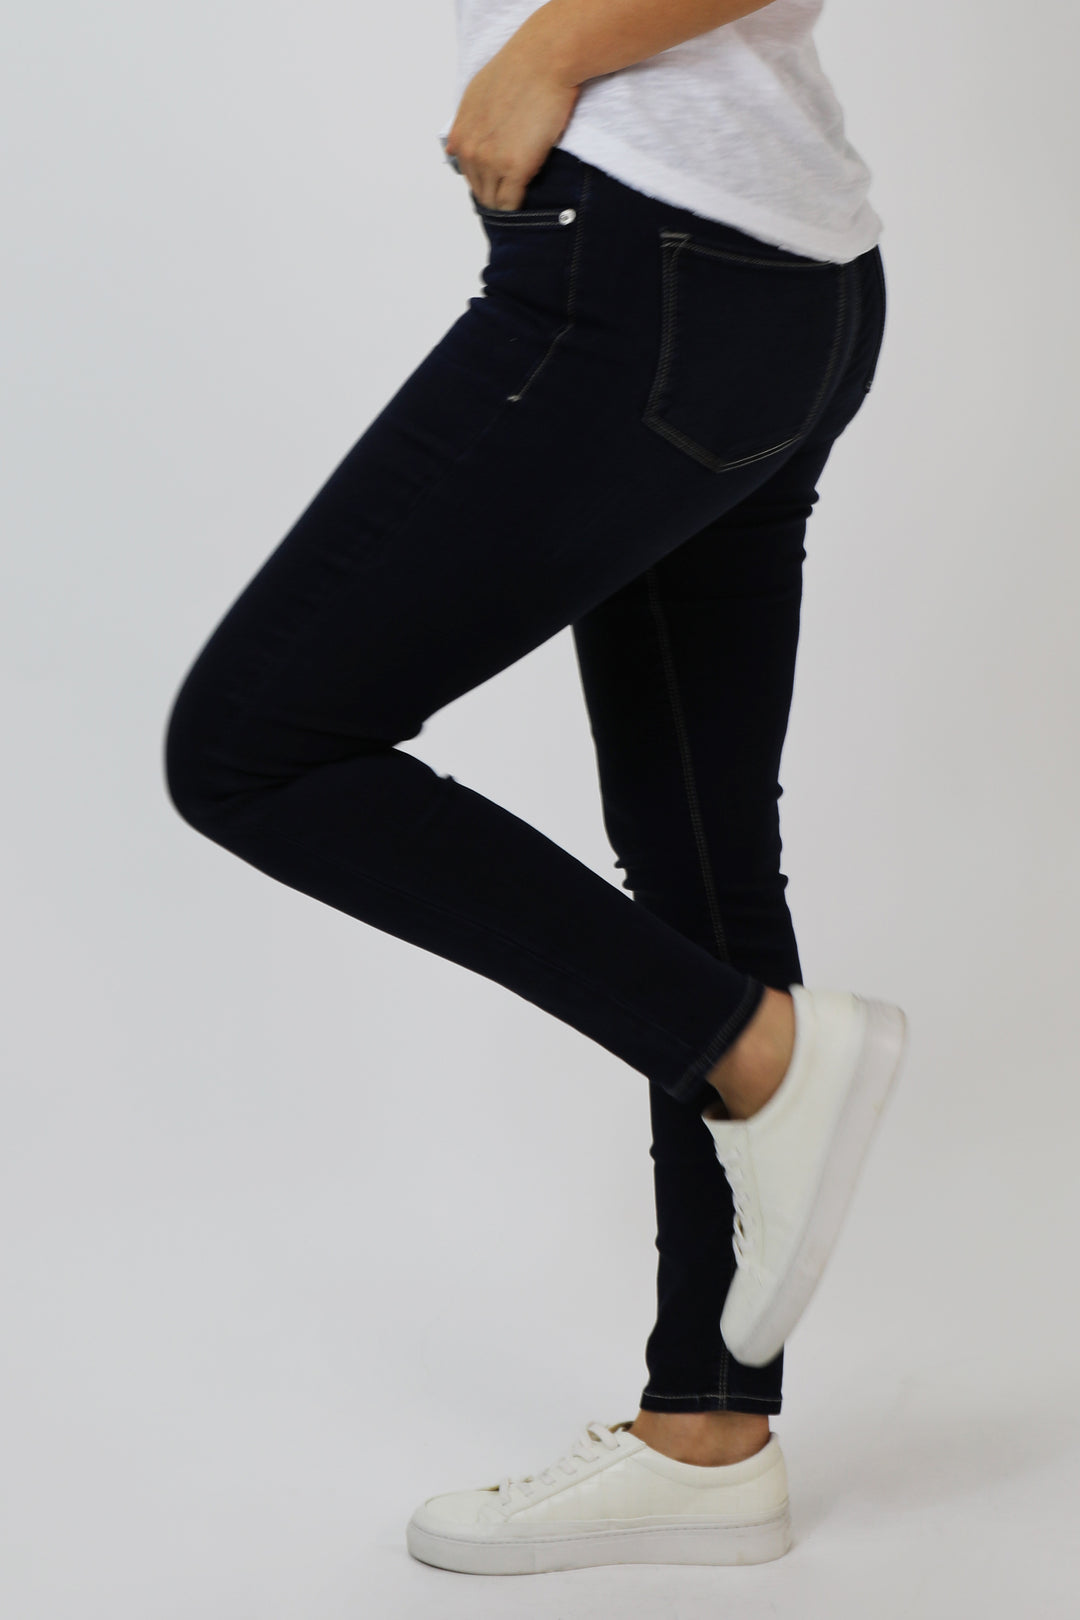 image of a female model wearing a gisele high rise skinny jeans cameron JEANS